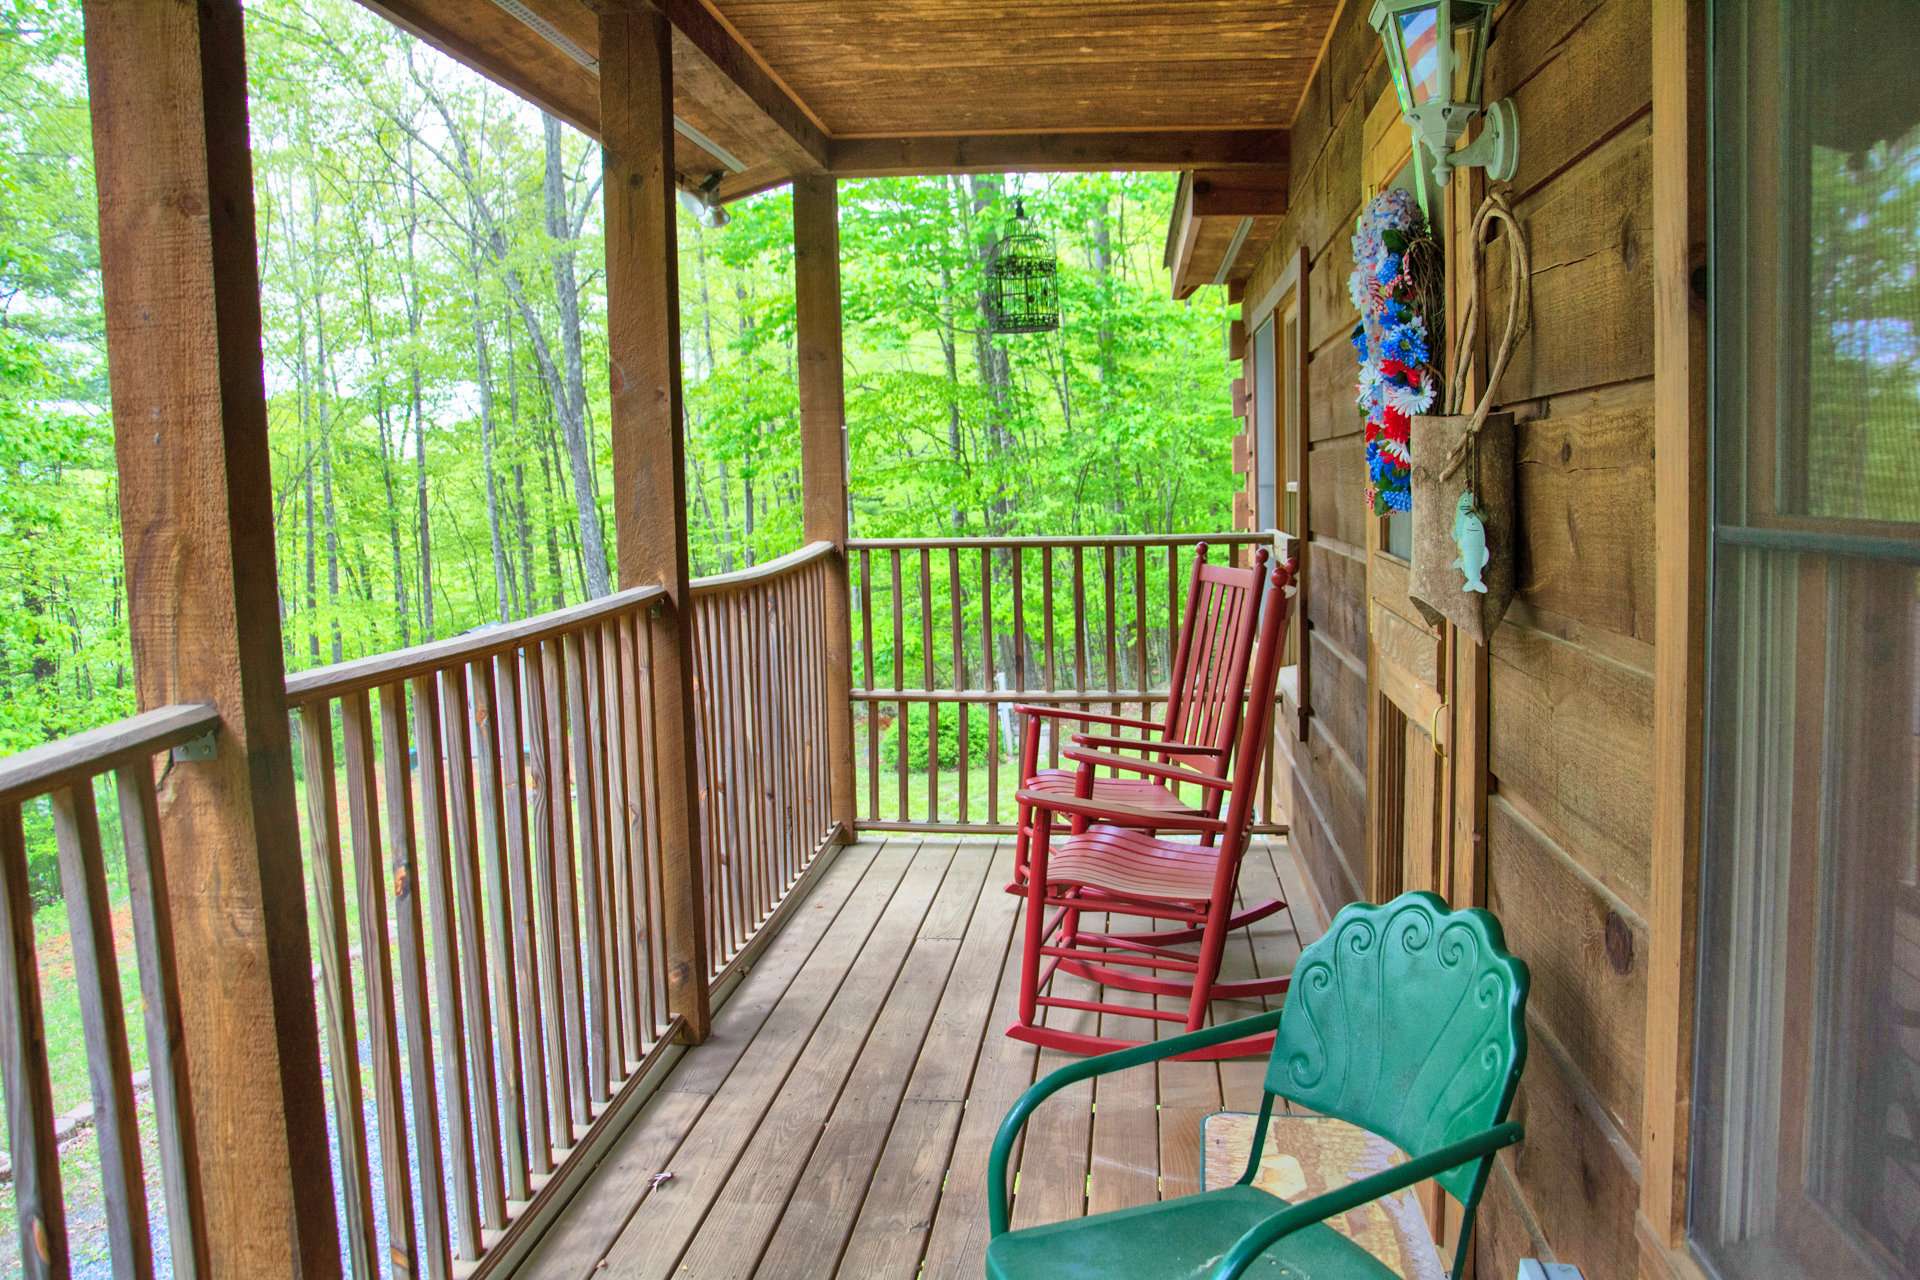 From the seclusion of your covered deck, you can enjoy the sounds of songbirds, the whispers of gentle breezes through the trees, and the rustling of the leaves as a whitetail deer meanders through the forest.